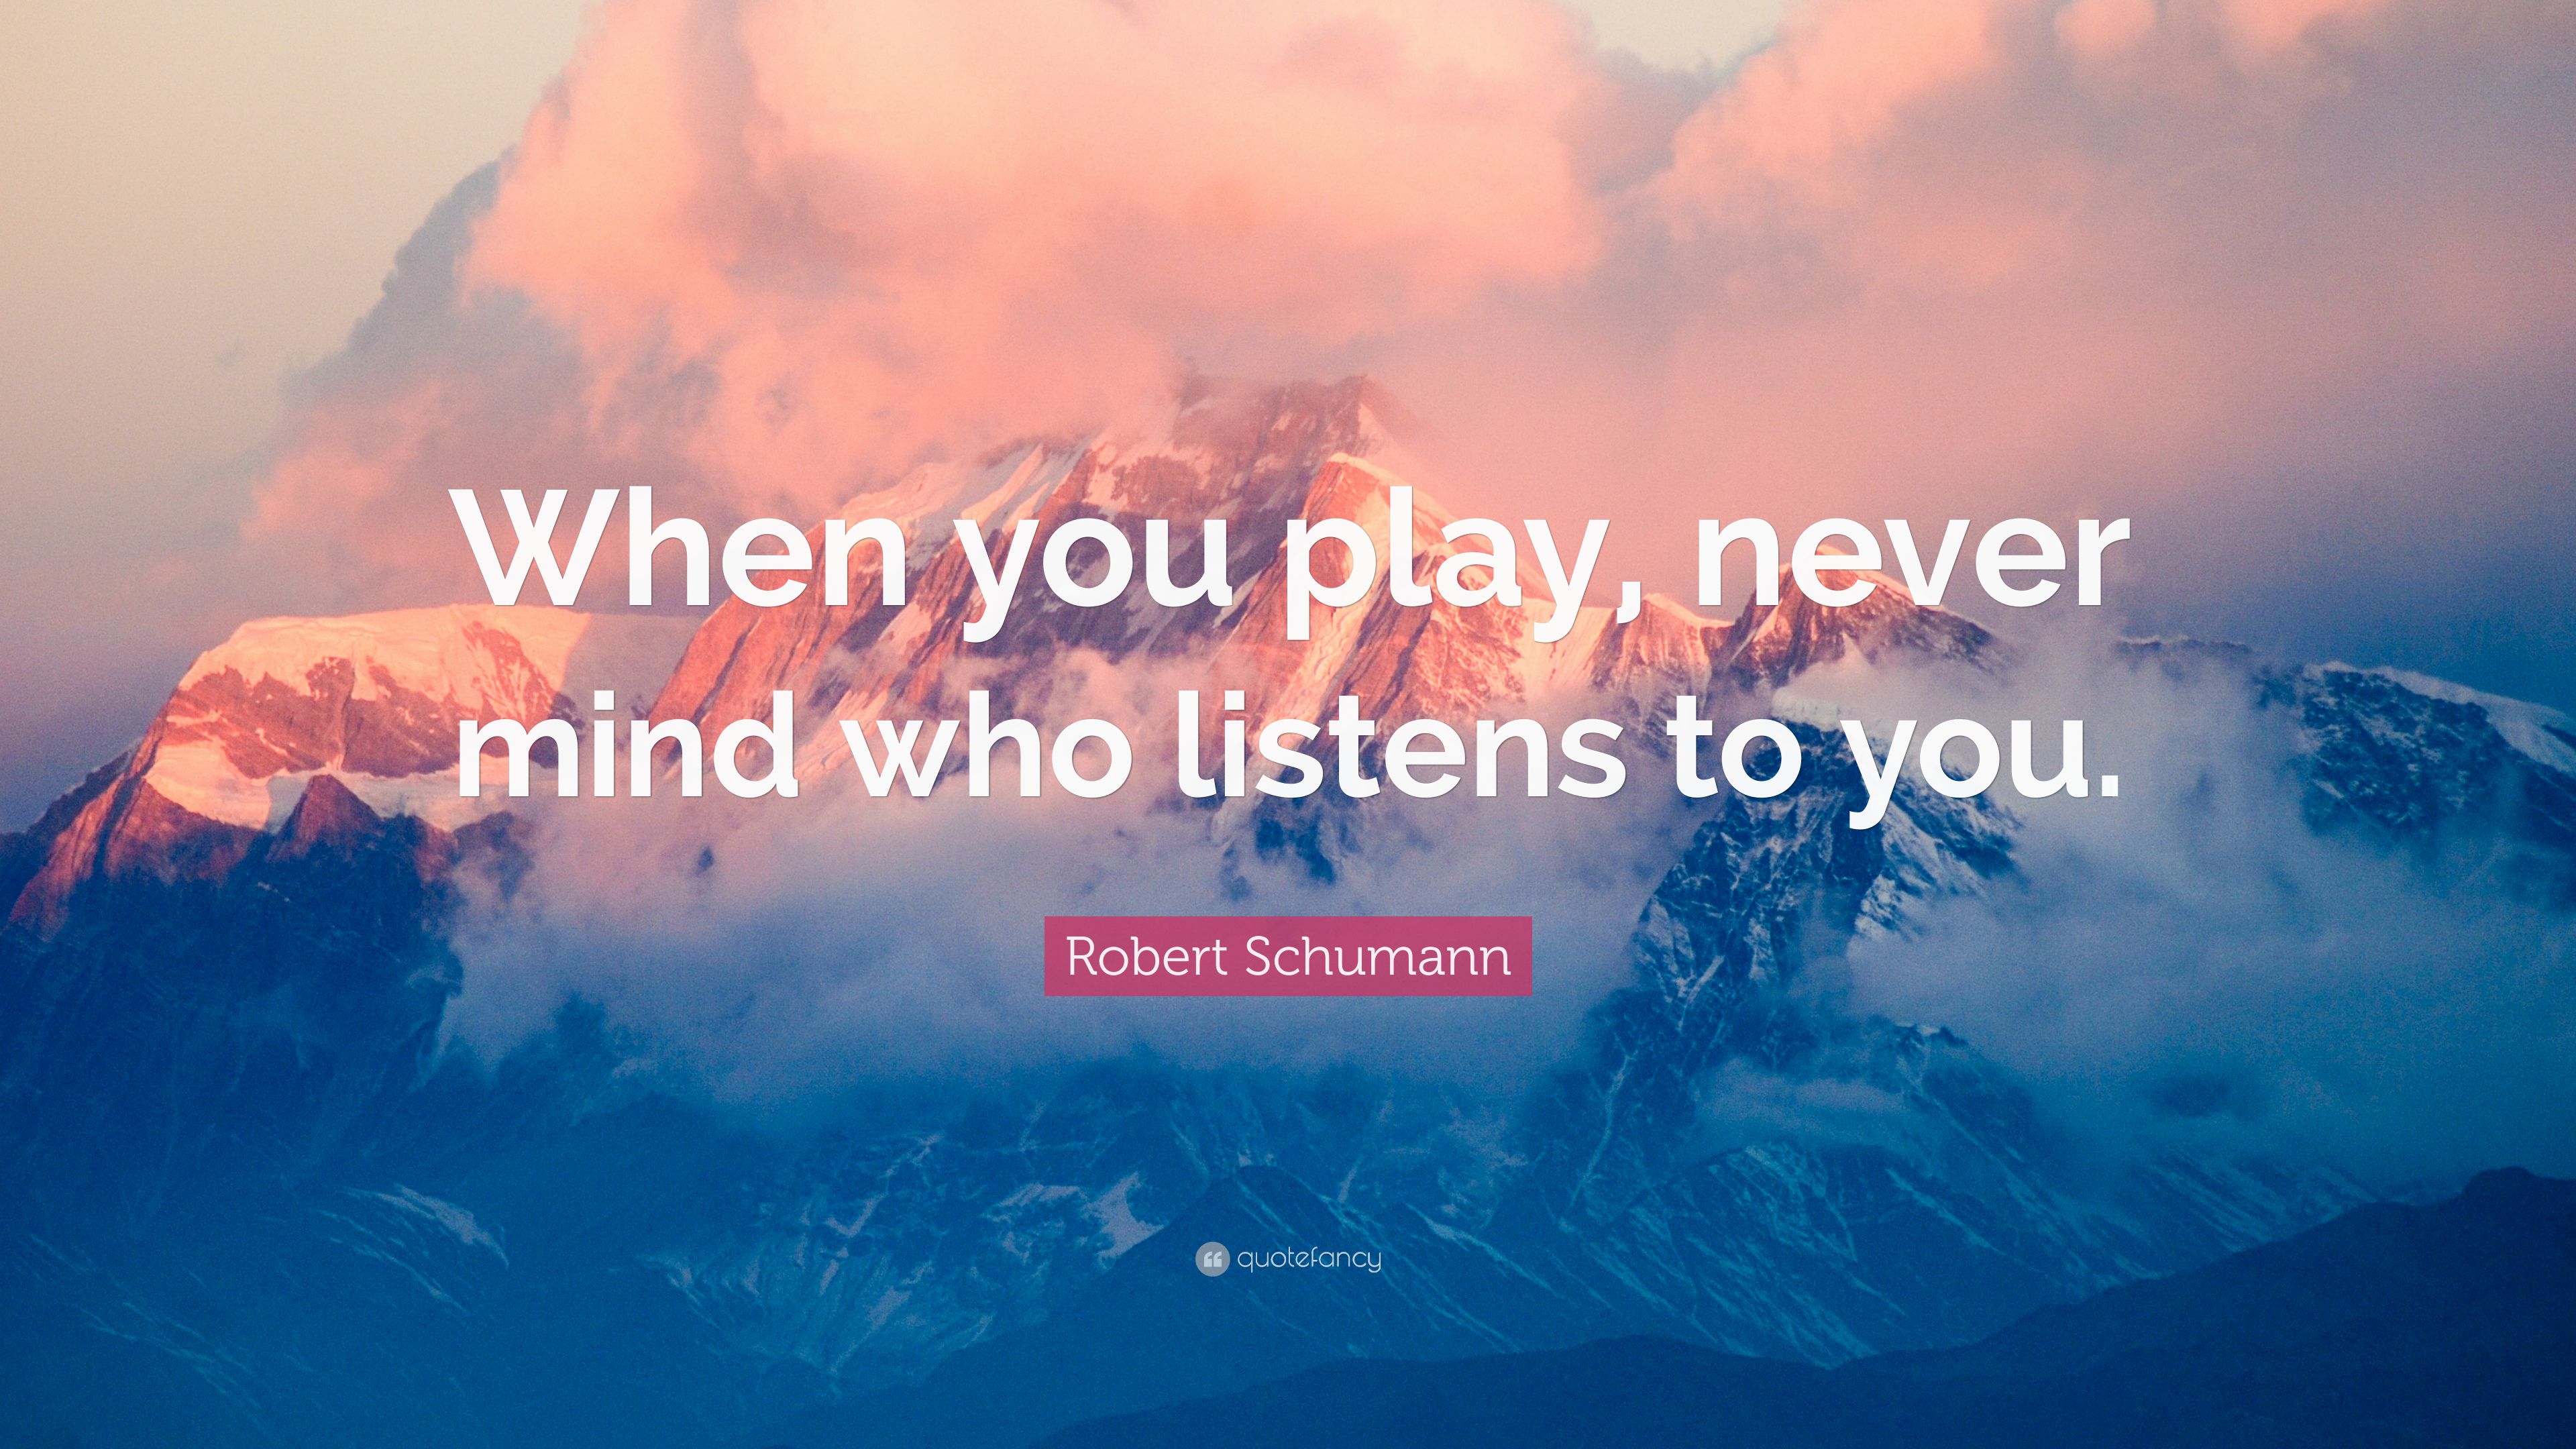 Robert Schumann Quote: “When you play, never mind who listens to